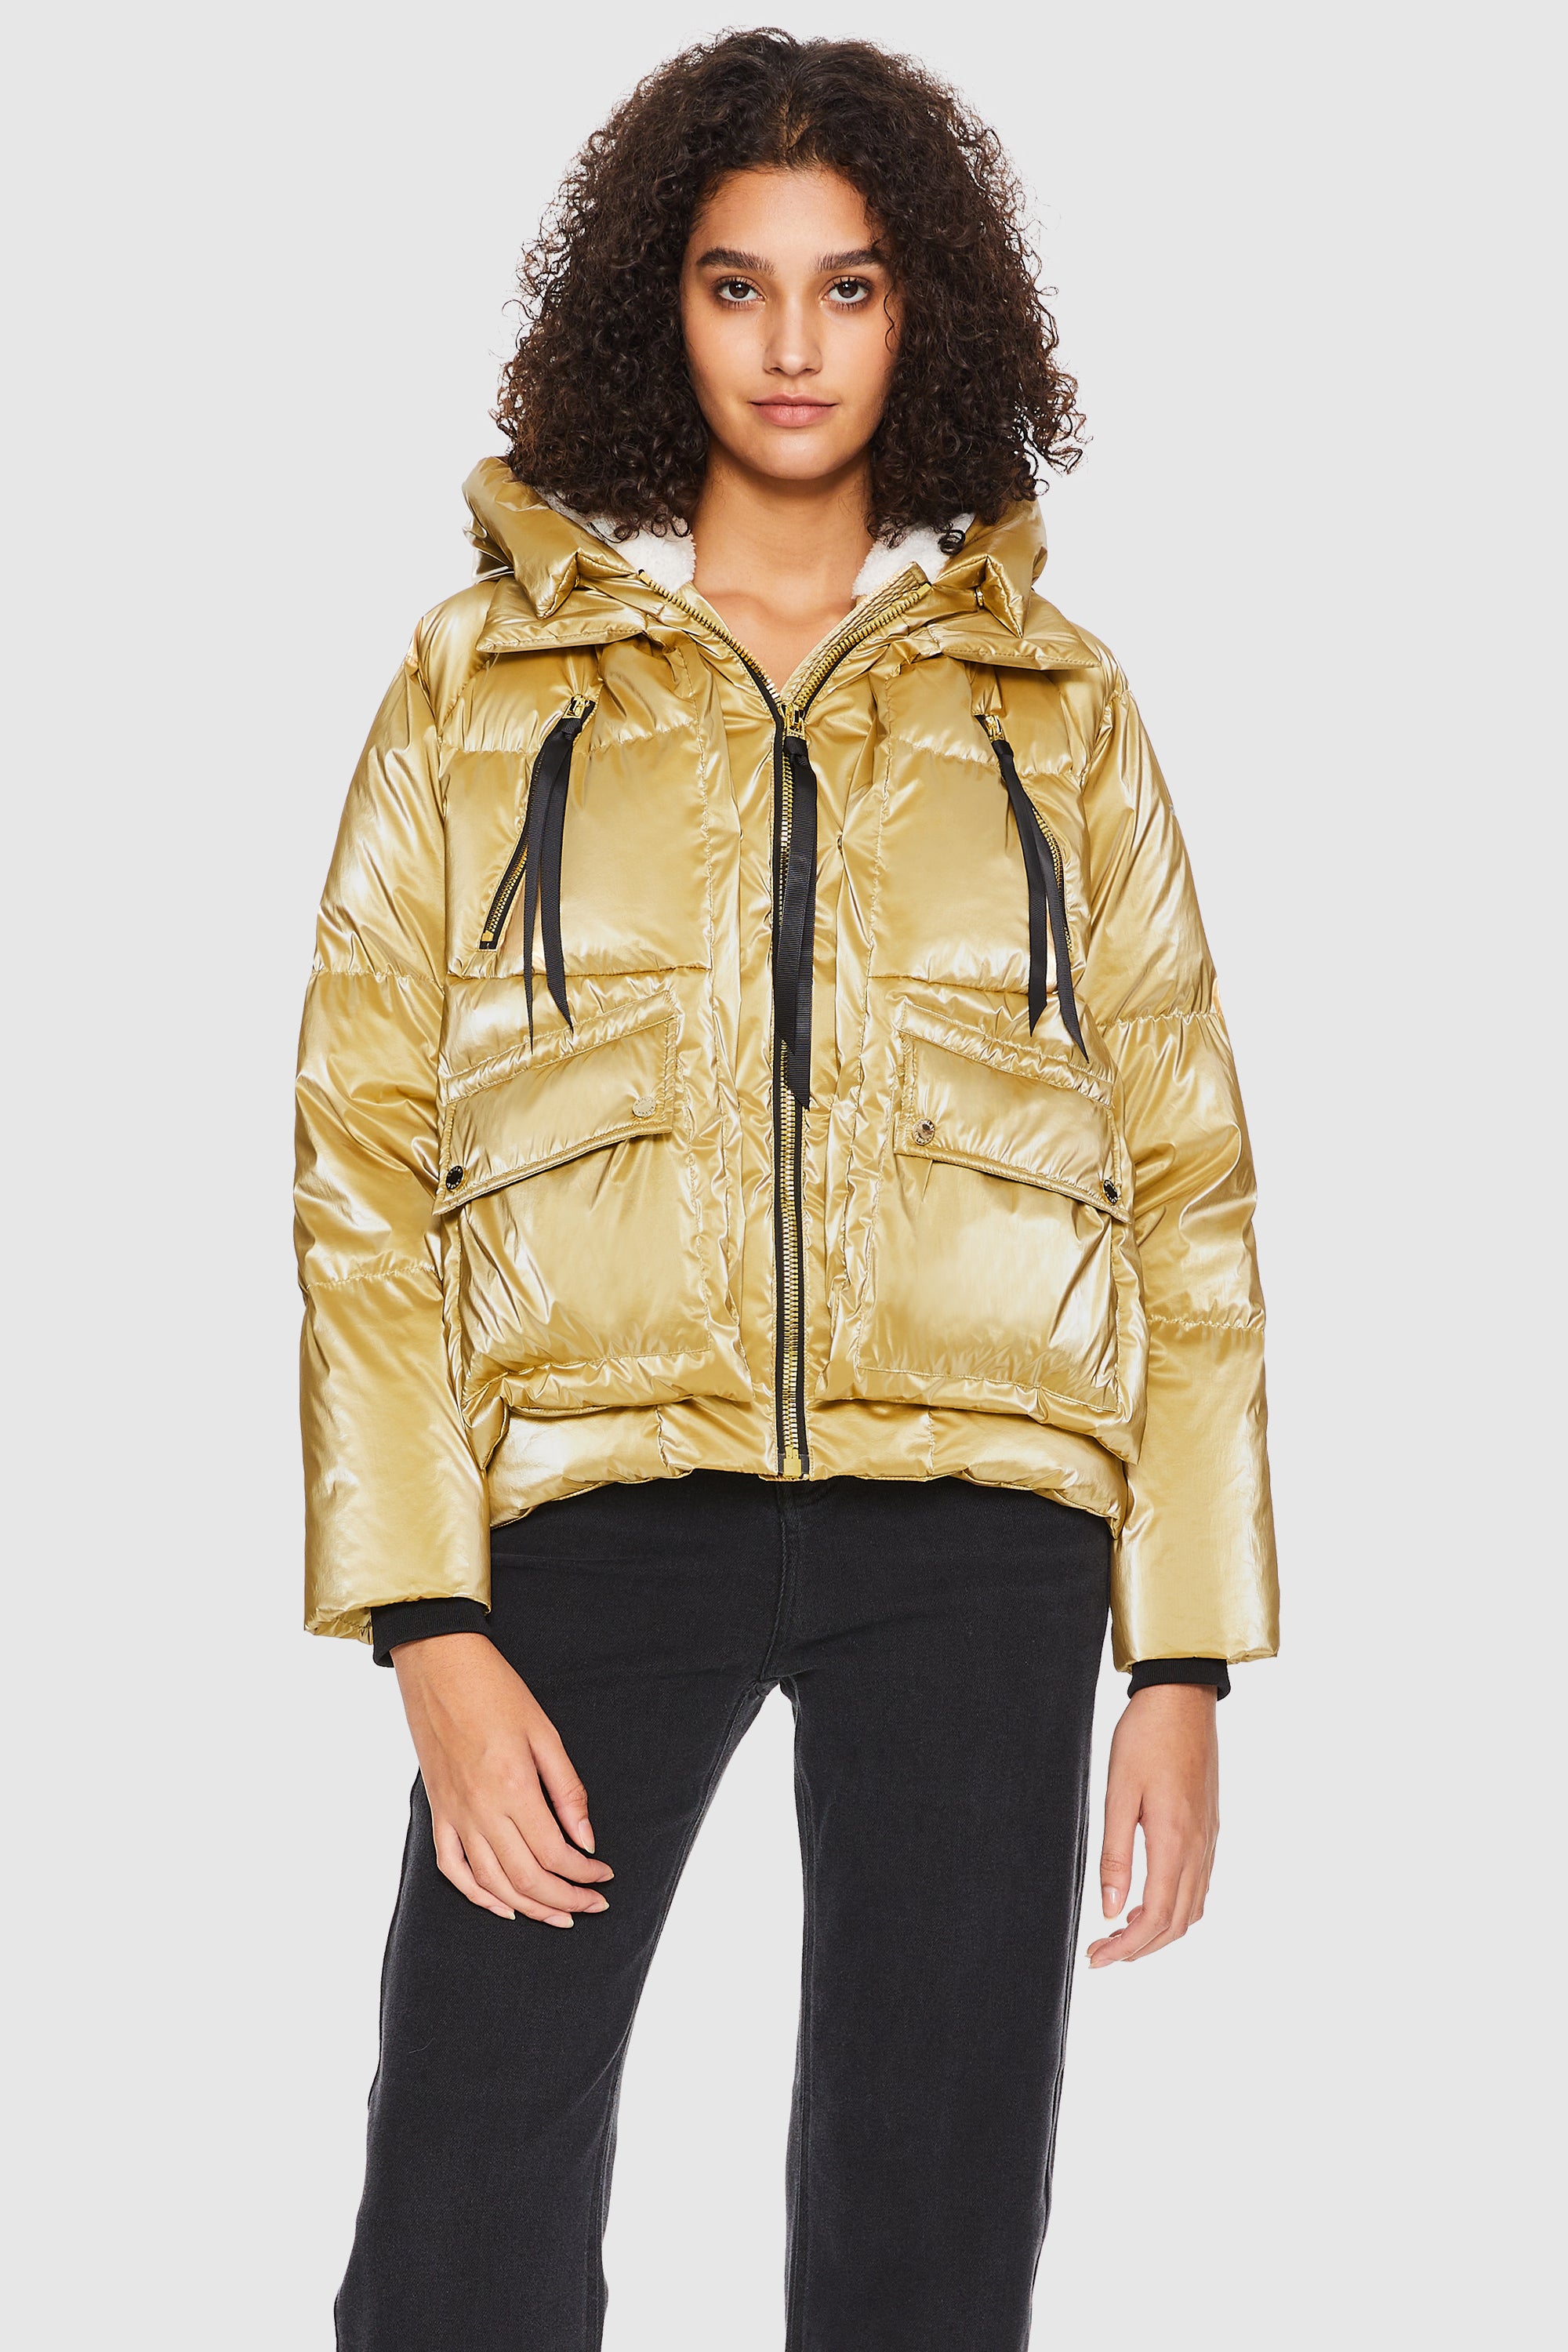 Buy Mast & Harbour Women Metallic Silver Toned Solid Hooded Bomber Jacket -  Jackets for Women 1977653 | Myntra